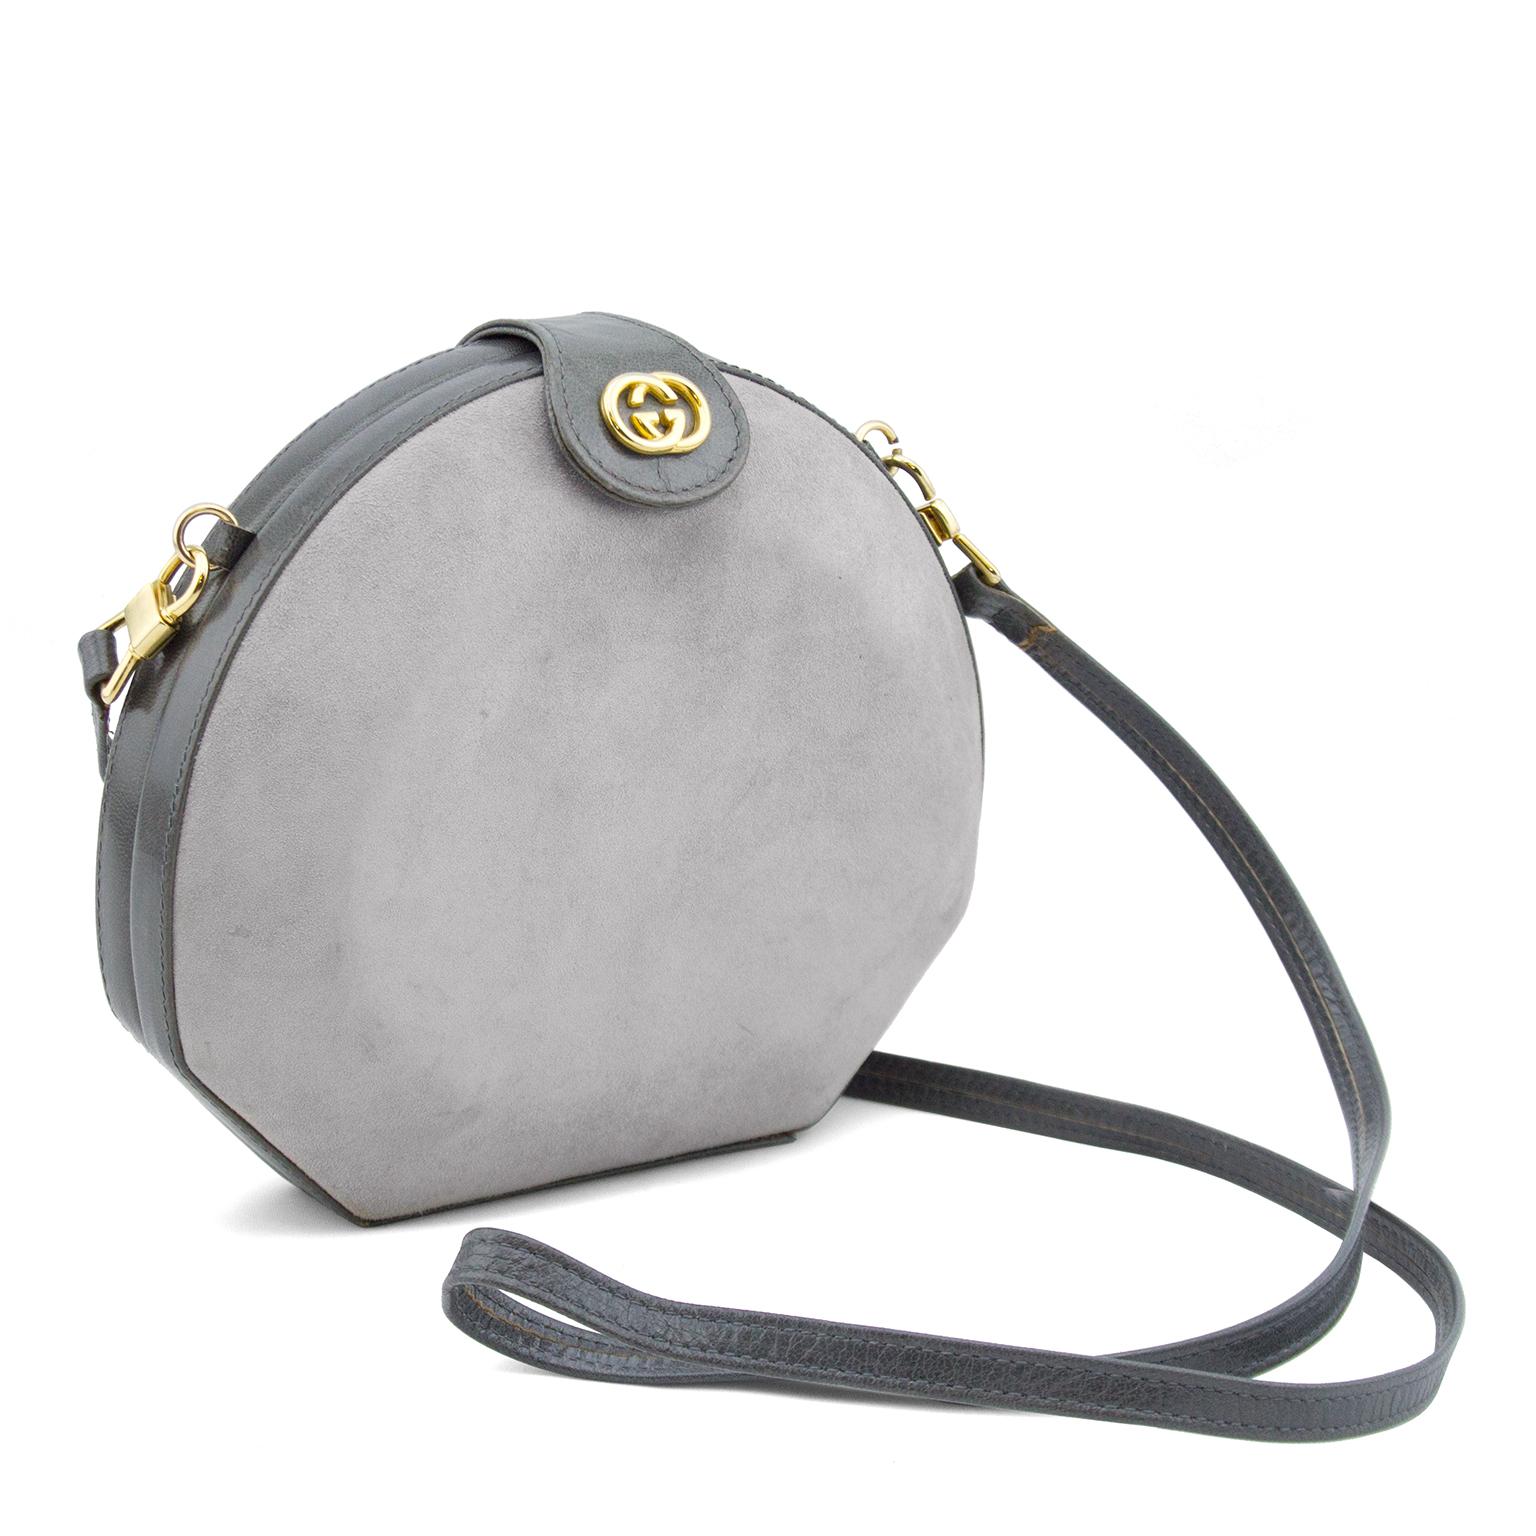 Unique 80s grey clamshell bag with a wonderful mix of finely grained leather and soft suede textures. Small top flap with GG medallion and snap covers the hinge frame which opens wide to reveal an black leather lining with stamped house signature.